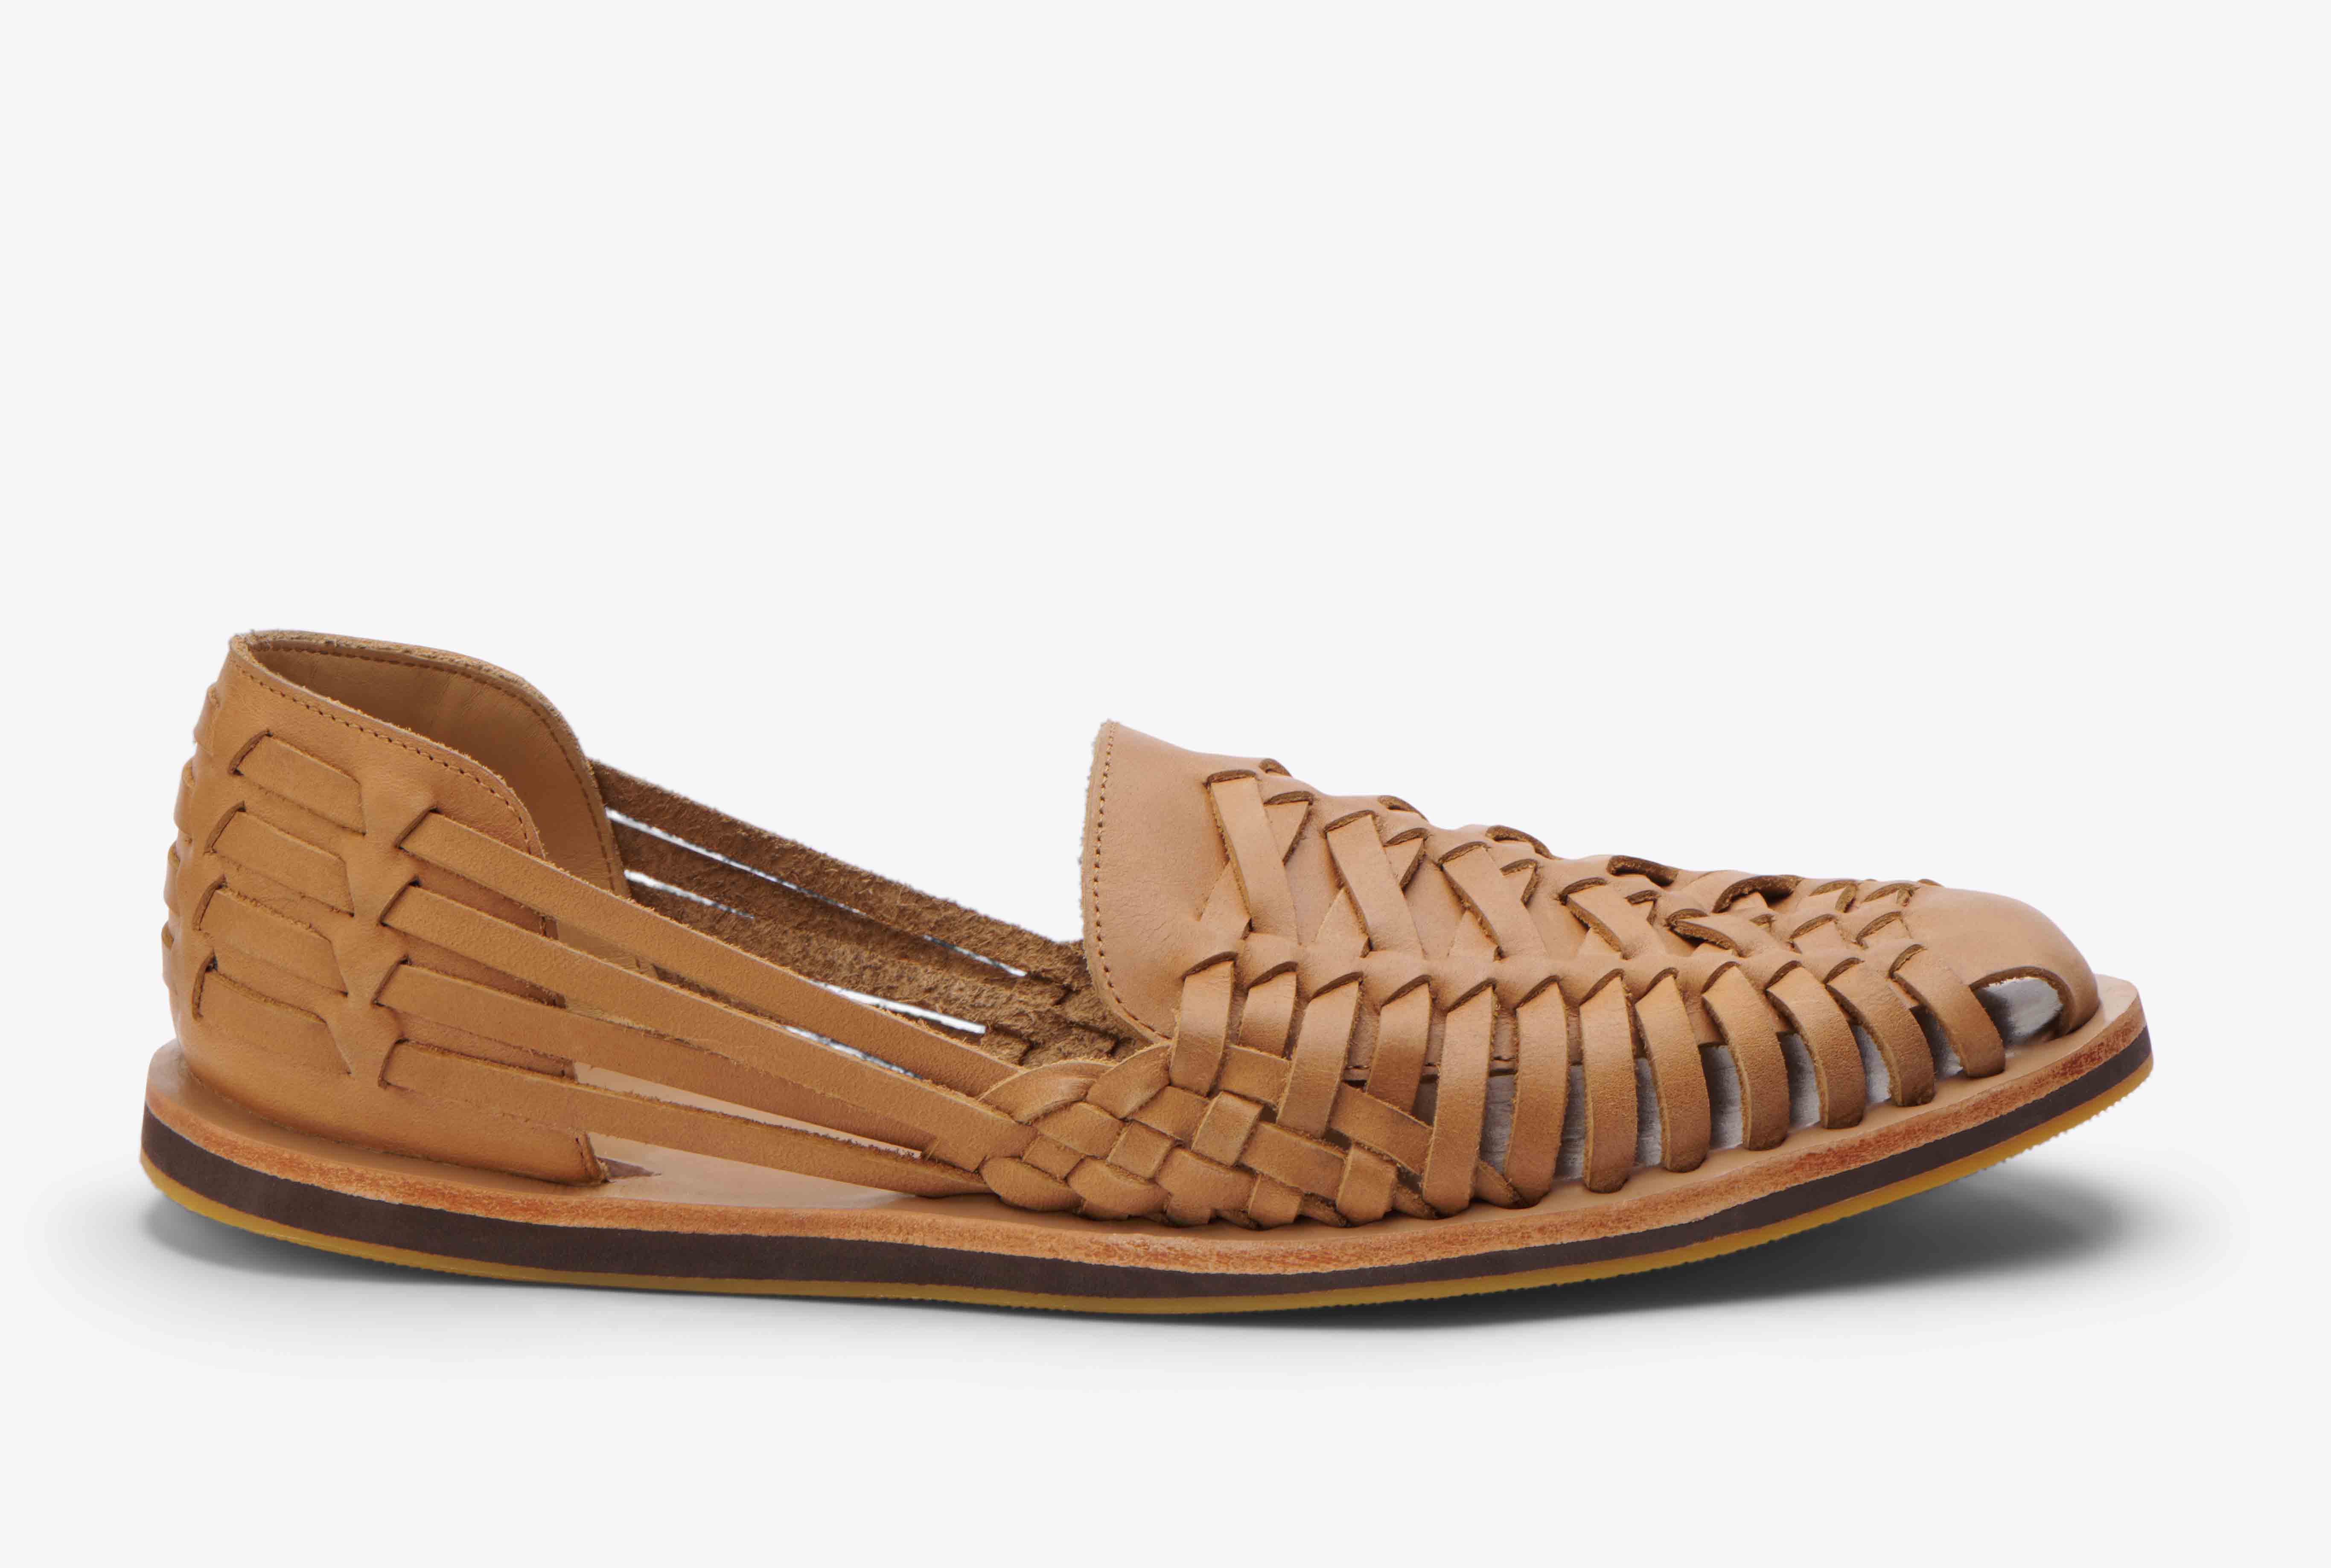 Nisolo Men's Huarache Sandal Almond - Every Nisolo product is built on the foundation of comfort, function, and design. 